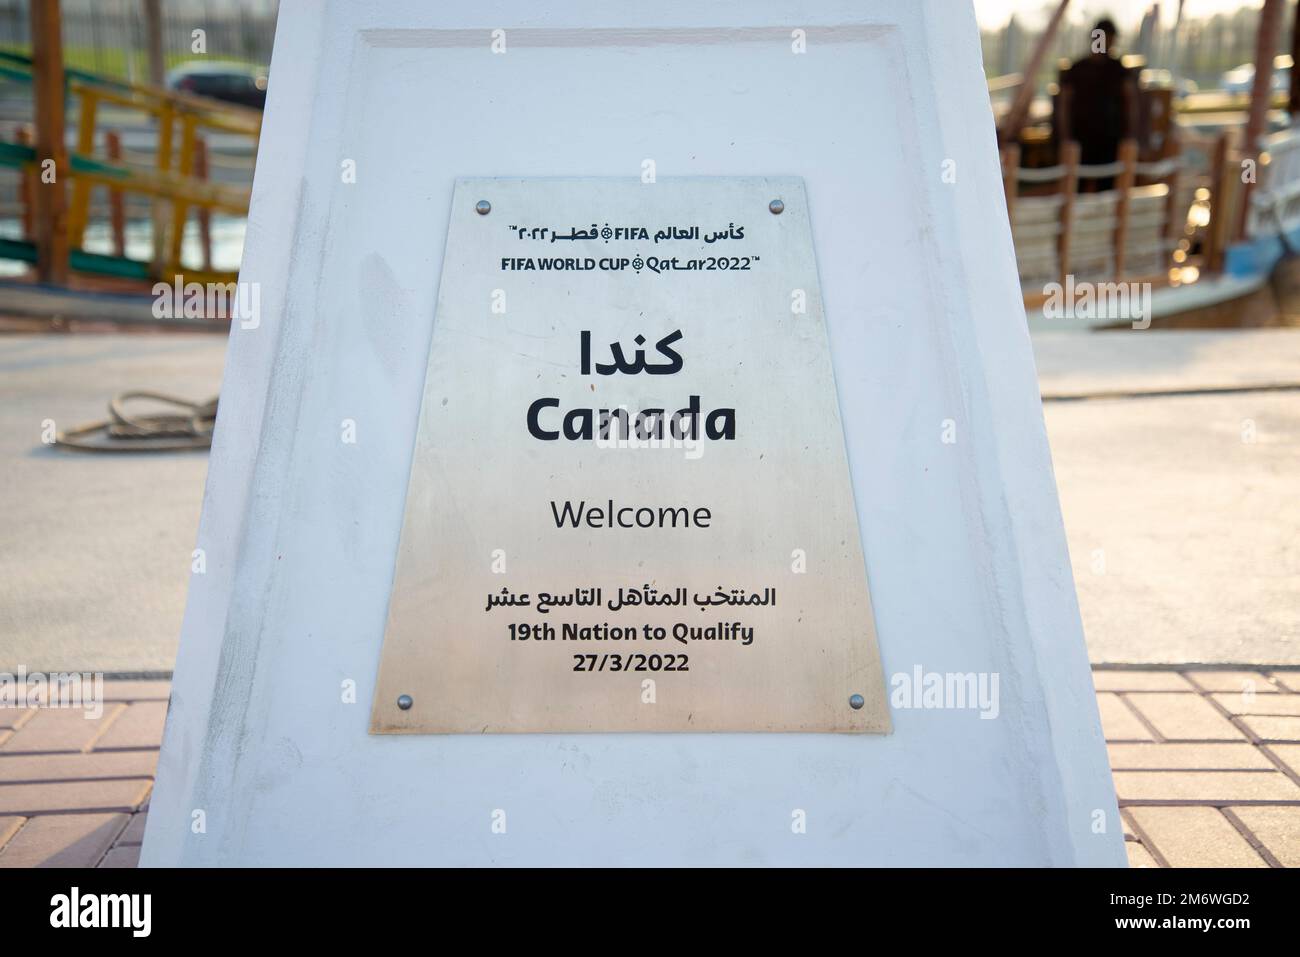 Doha, Qatar - October 6, 2022: FIFA World Cup qualified date plaque for Canada Stock Photo